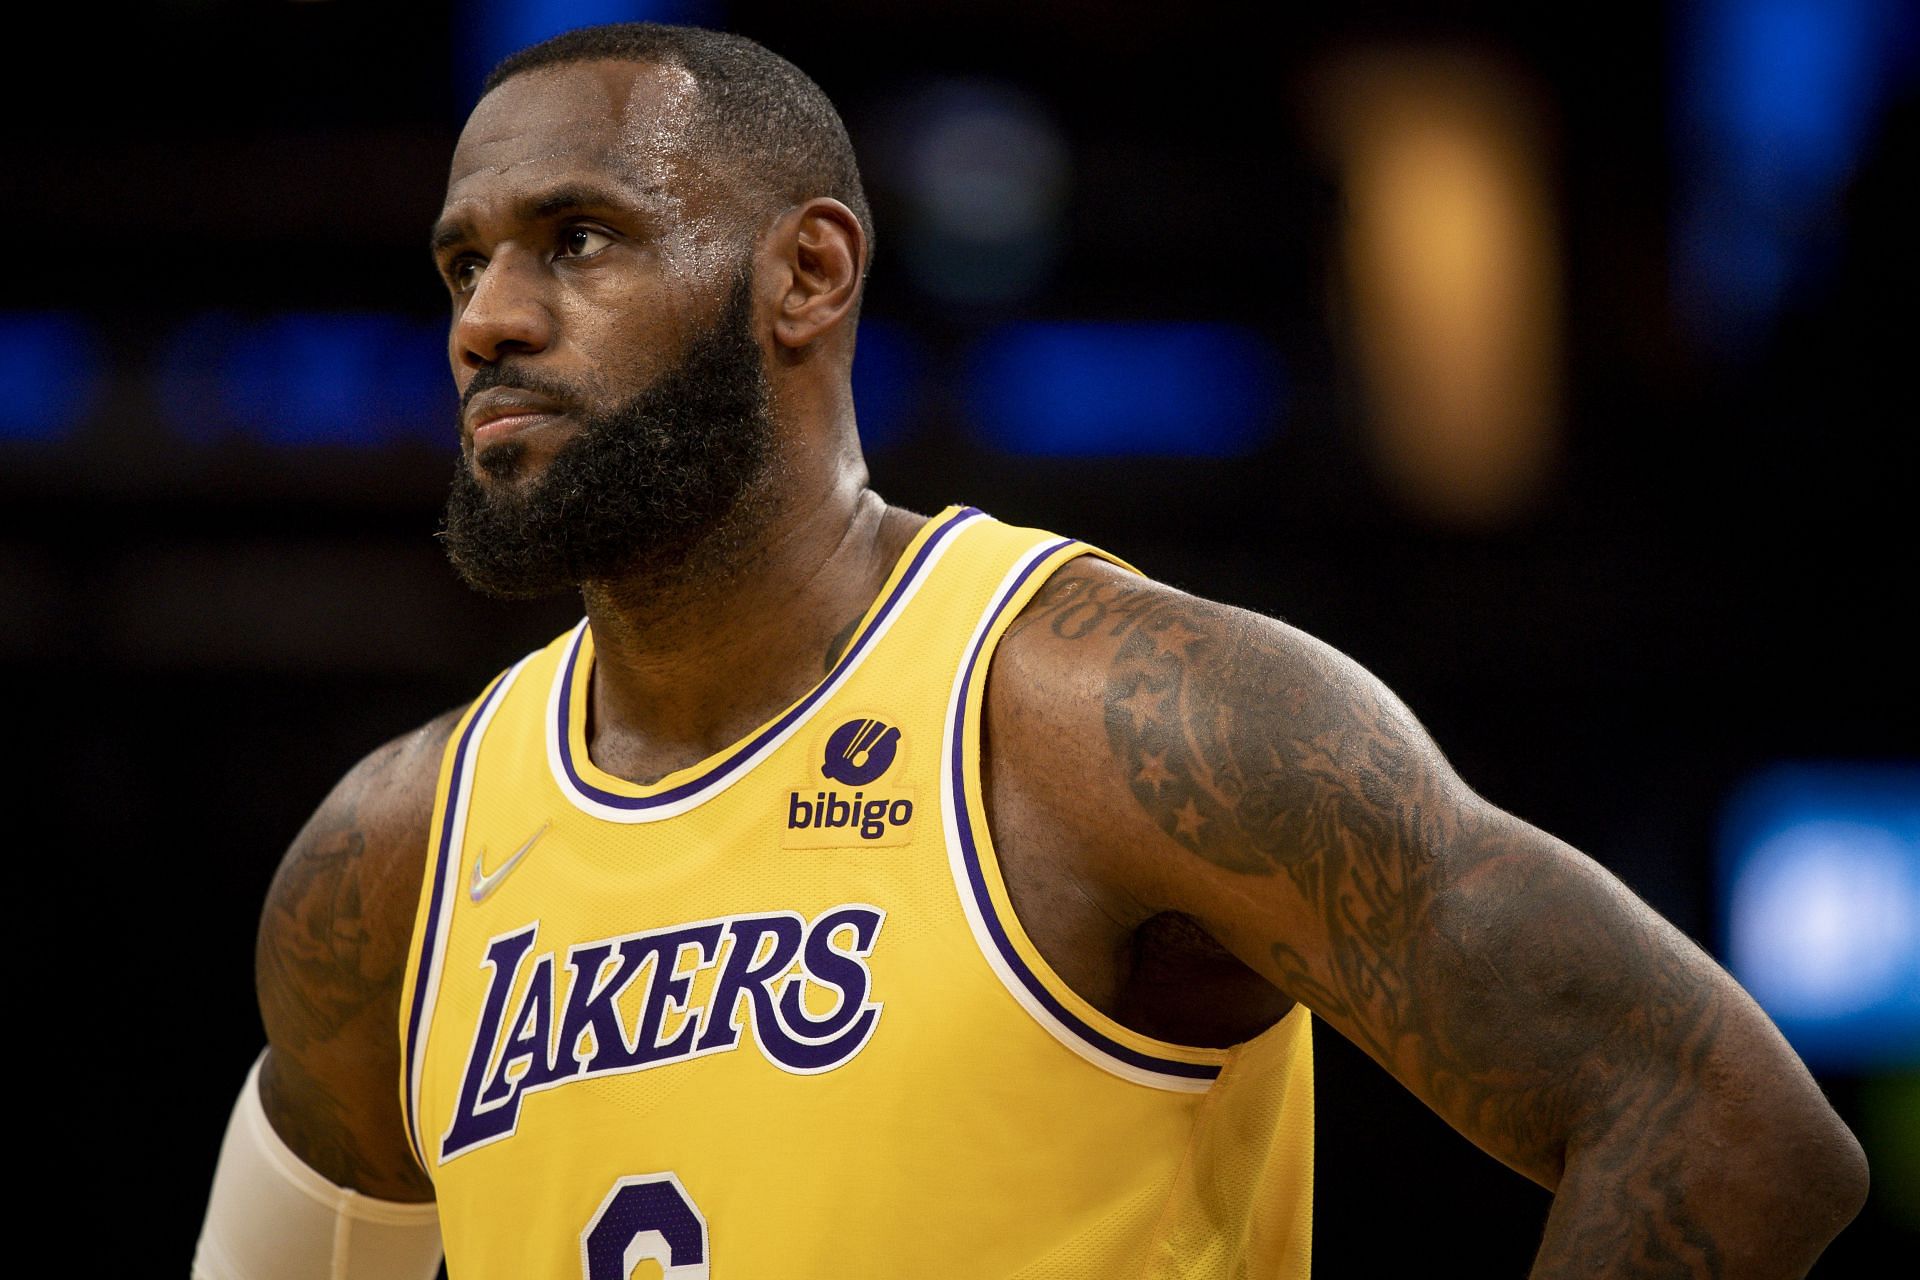 LeBron James recently tested positive for Covid-19